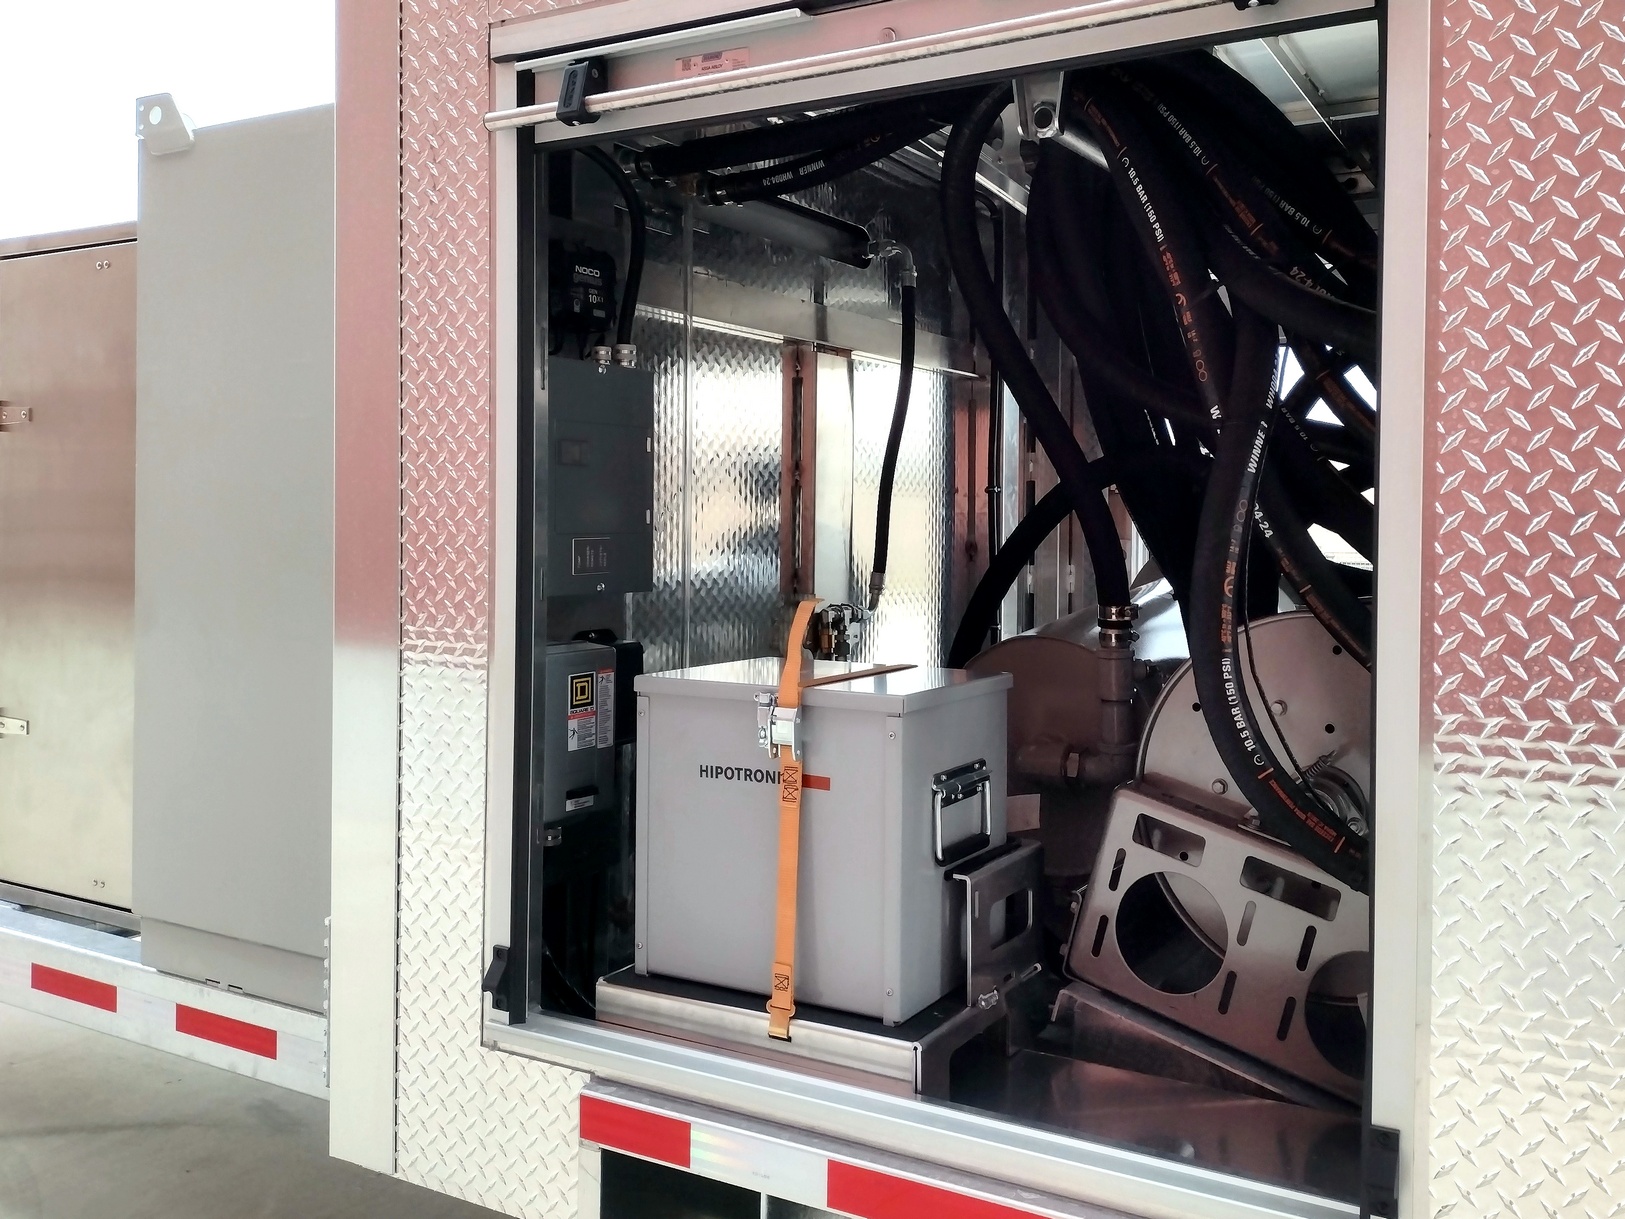 Left side view of a Sauber Model 1594 Oil Filtration Trailer's rear aluminum compartment side door. The door is open showing storage for a Hipotronic measuring device and electronic controls.